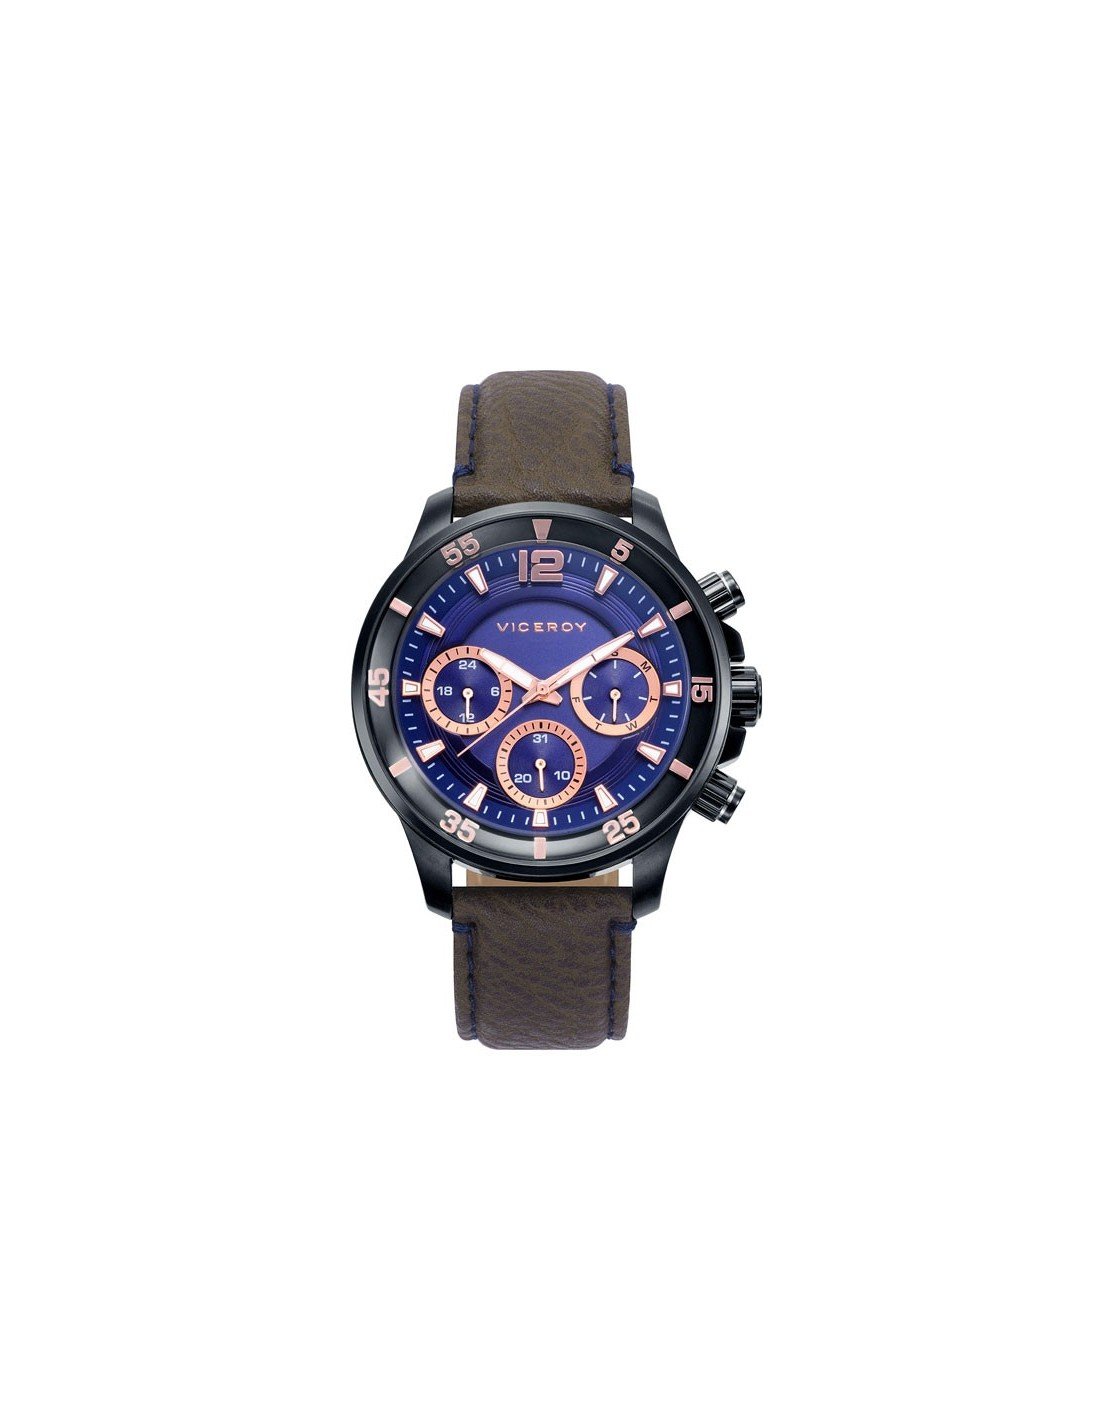 Viceroy Watch 42223-35 - Viceroy Watches